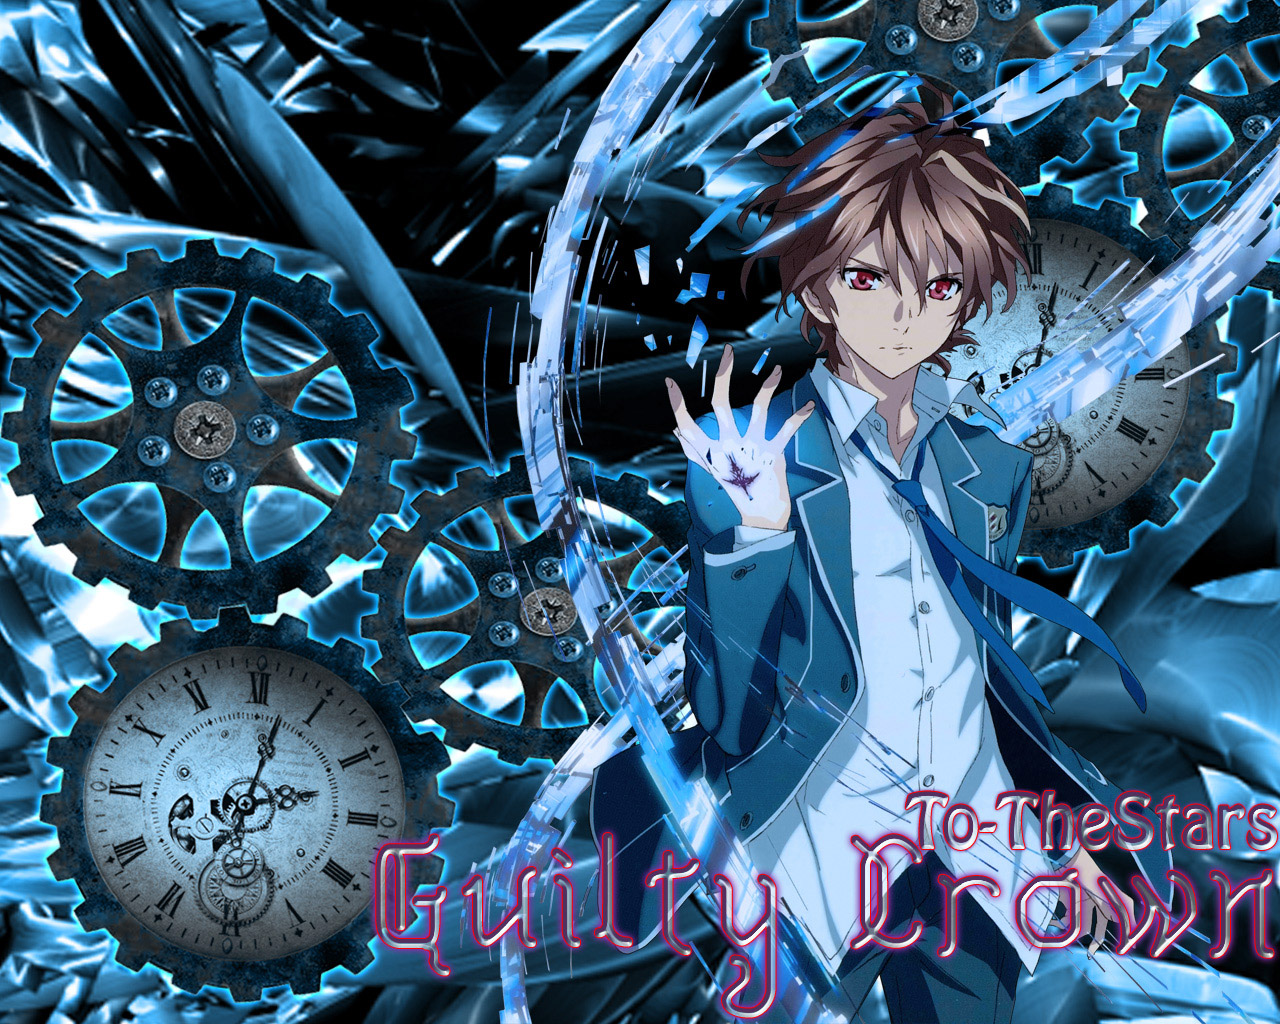 Free Download Guilty Crown Wallpaper Shu Hd Guilty Crown Review 1280x1024 For Your Desktop Mobile Tablet Explore 46 Guilty Crown Wallpaper Hd Guilty Gear Wallpapers Crown Wallpapers Guilty Gear Wallpaper